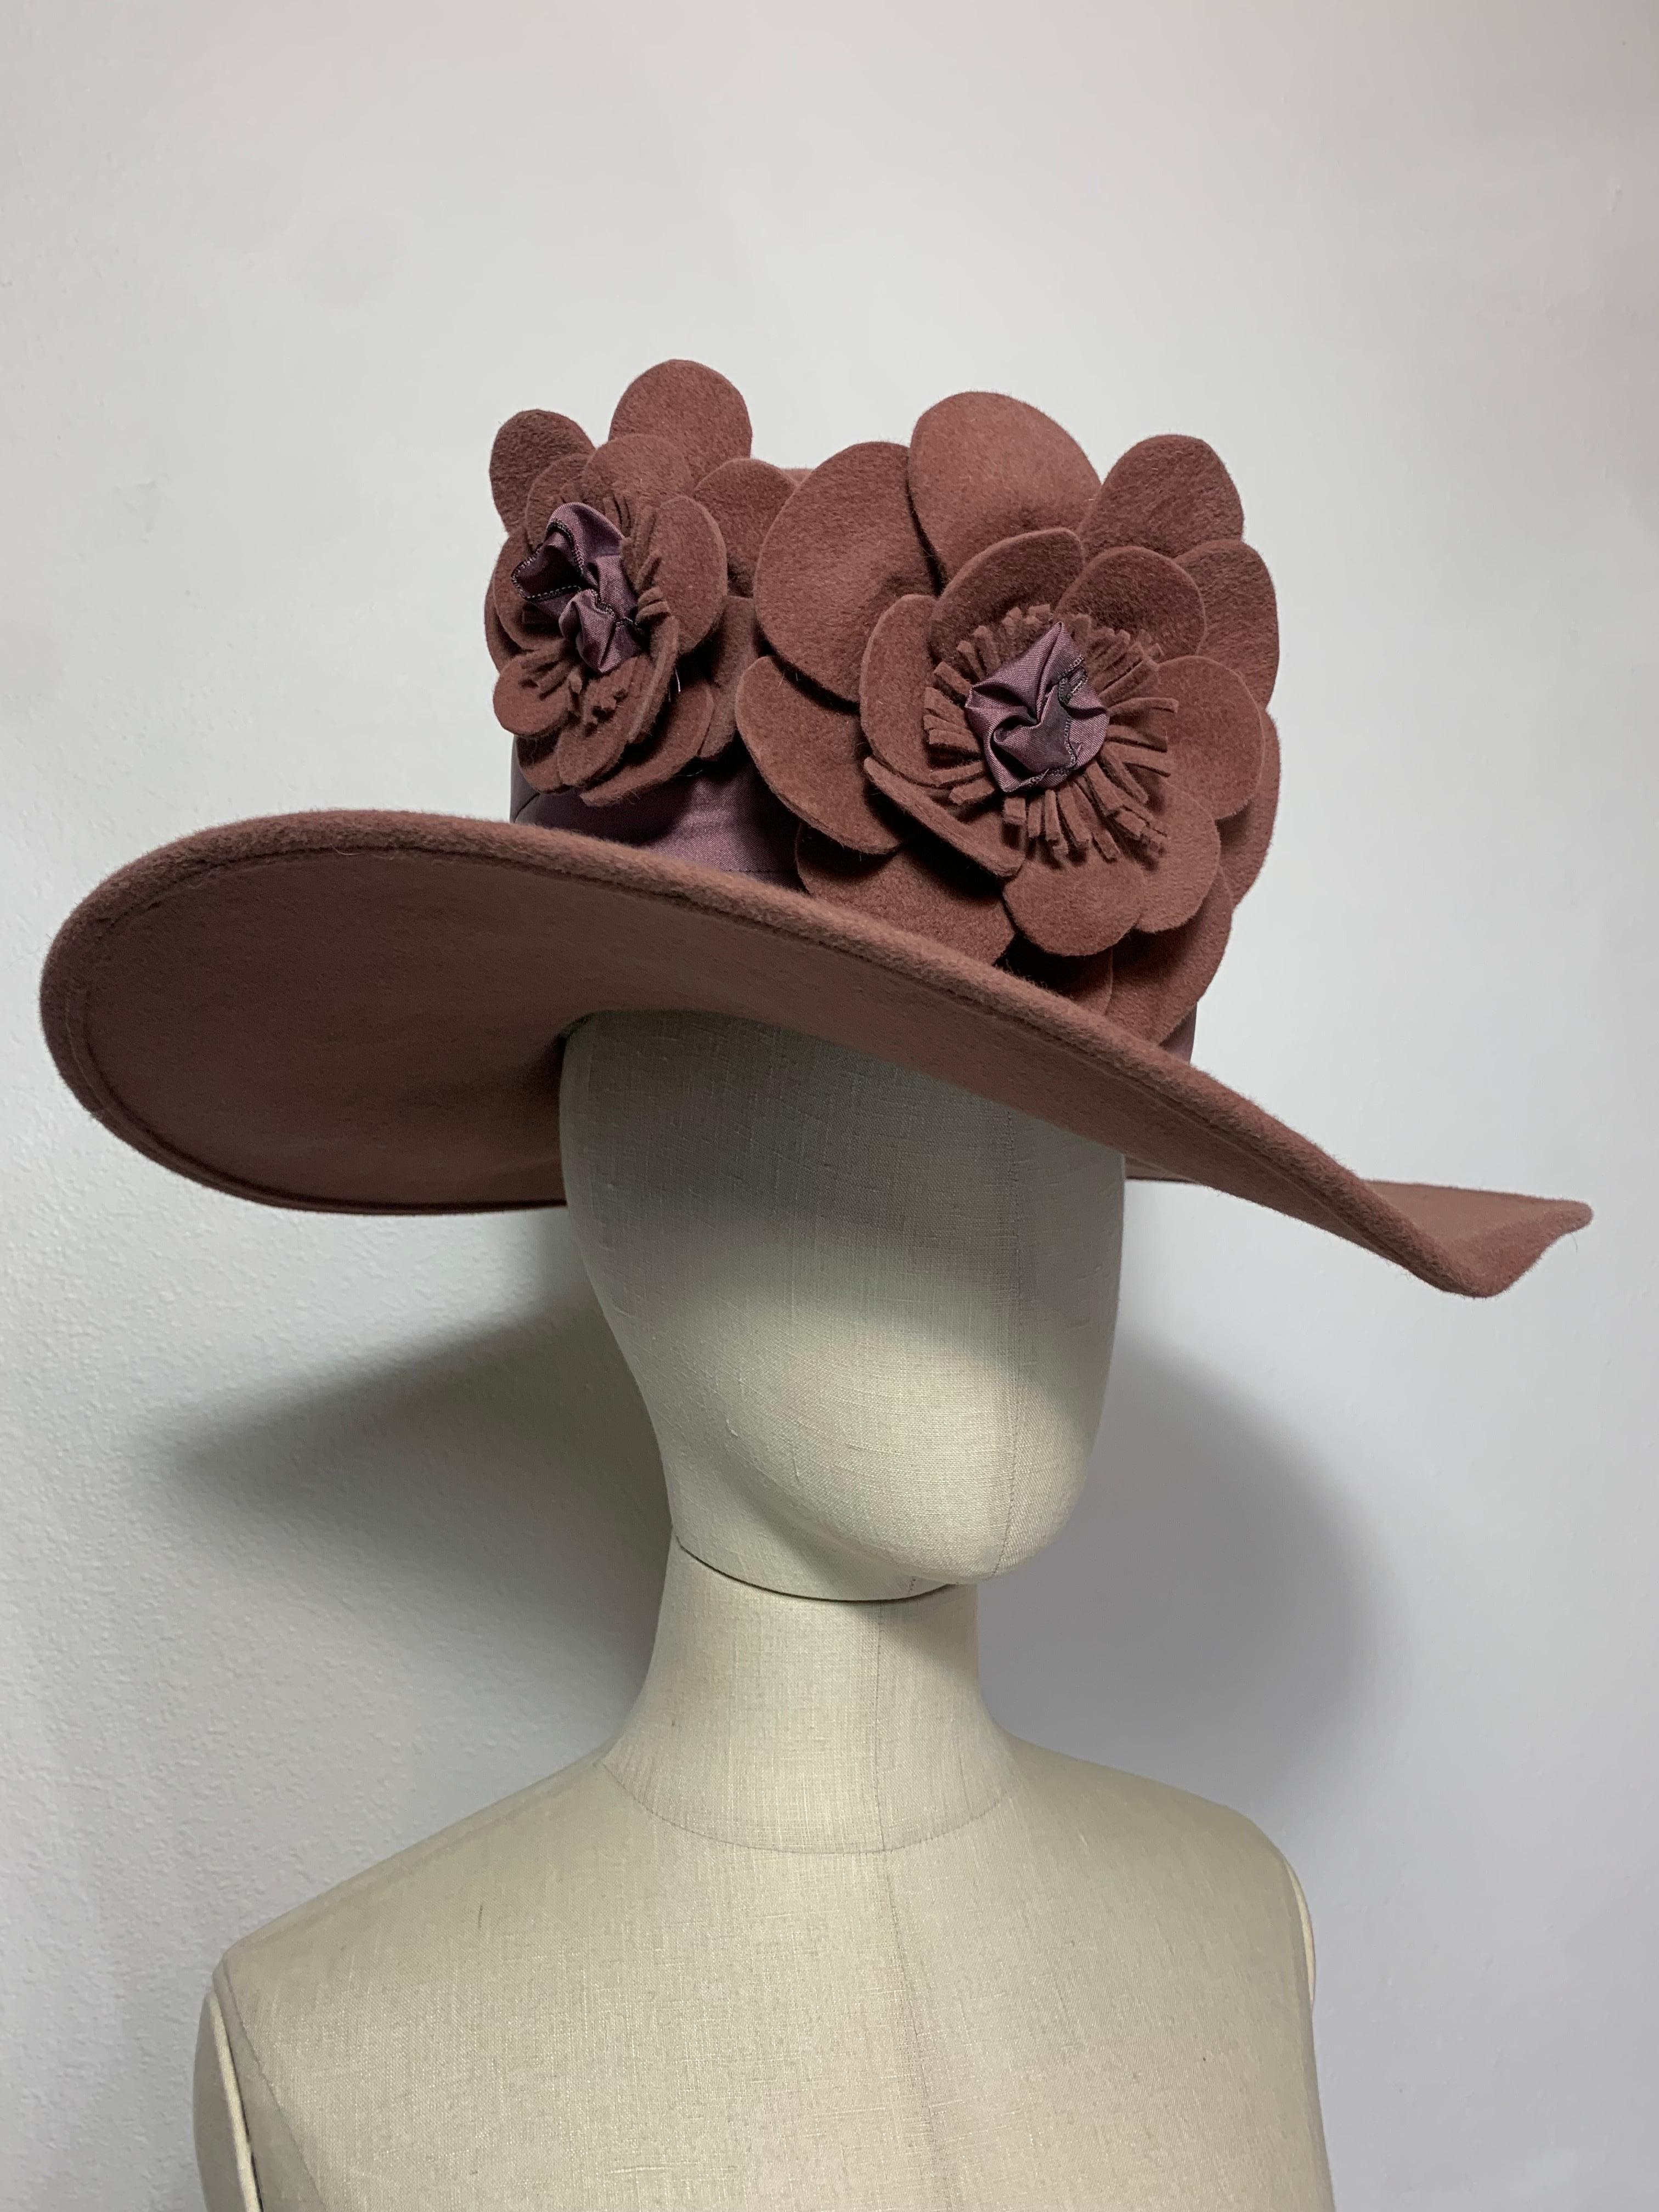 Maison Michel Autumn/Winter Medium Brim Mauve Felt  Beautifully Blocked High Top Hat with Matching Felt and Ribbon Flowers and Wide Pleated Ribbon Band: Unlabeled, with attached combs for securing. Size 7 1/8 Medium. Made in France. 

Please visit